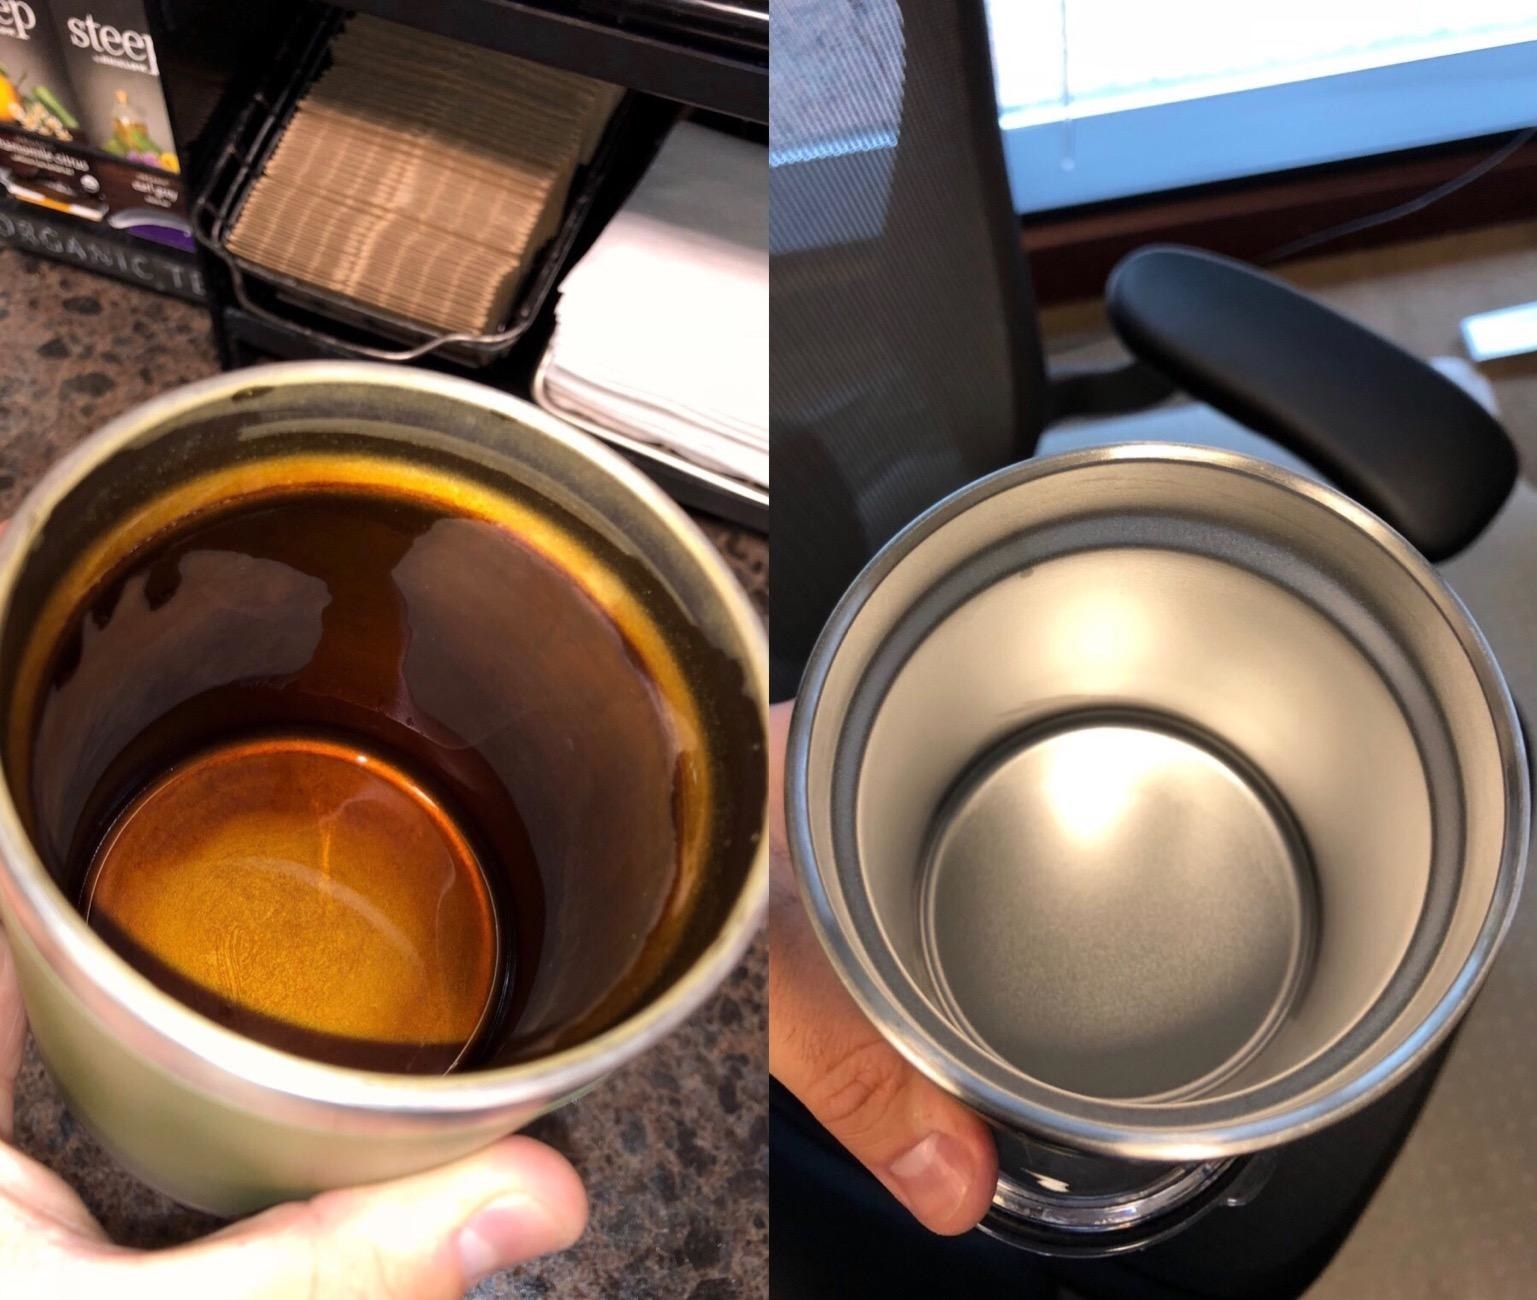 A reviewer&#x27;s before/after showing brown tea stains before and clean and shiny stainless steel after